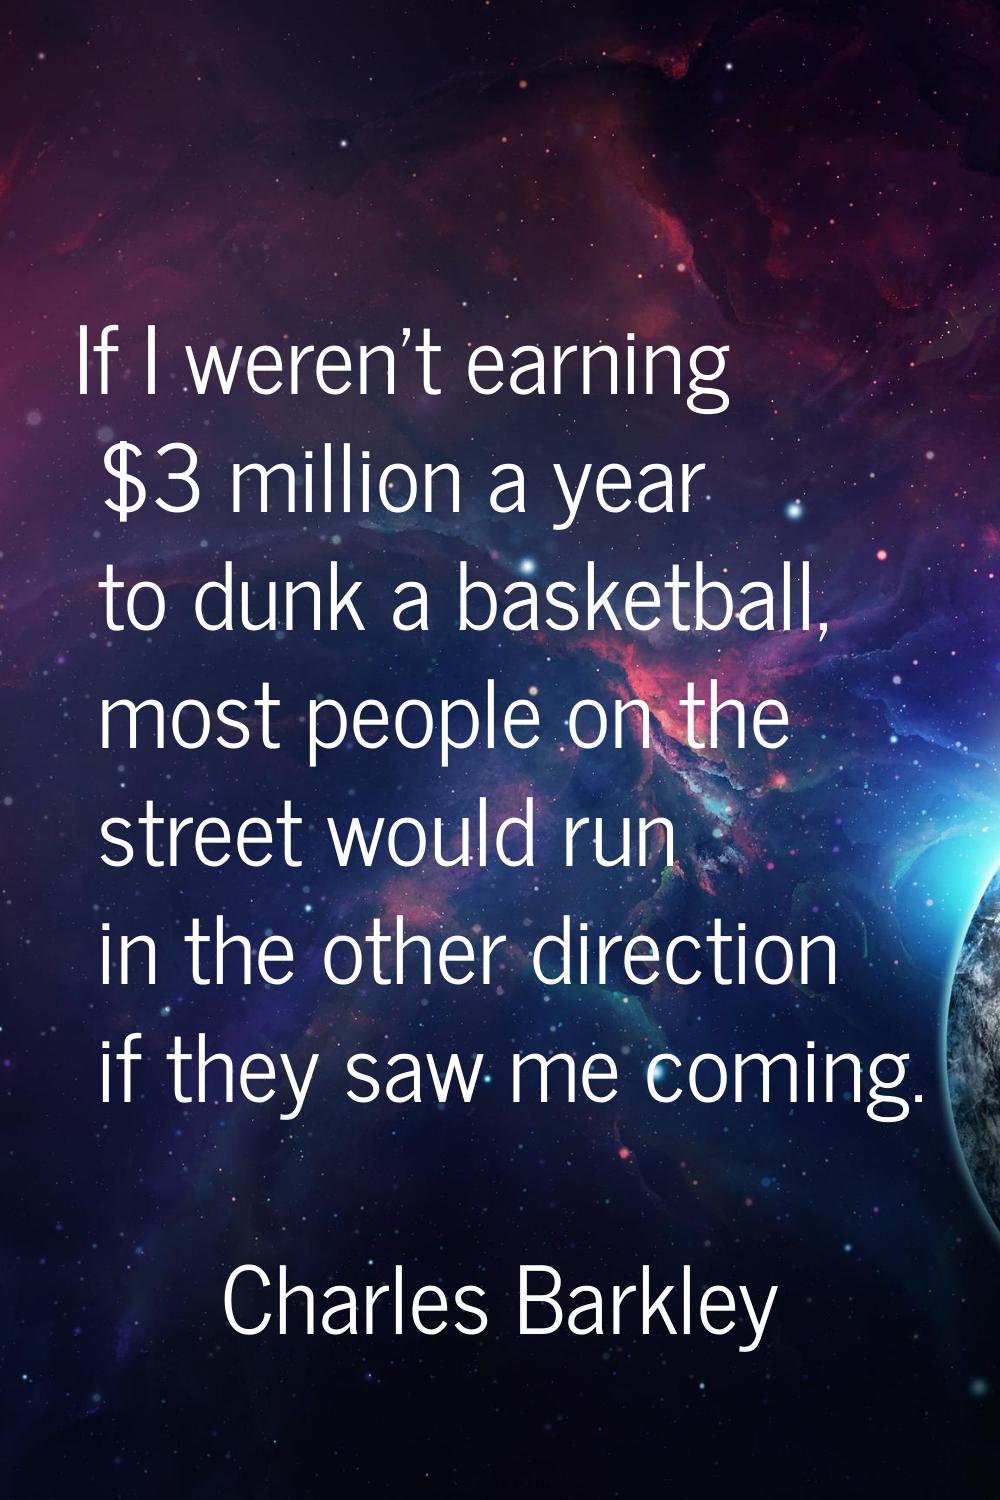 If I weren't earning $3 million a year to dunk a basketball, most people on the street would run in